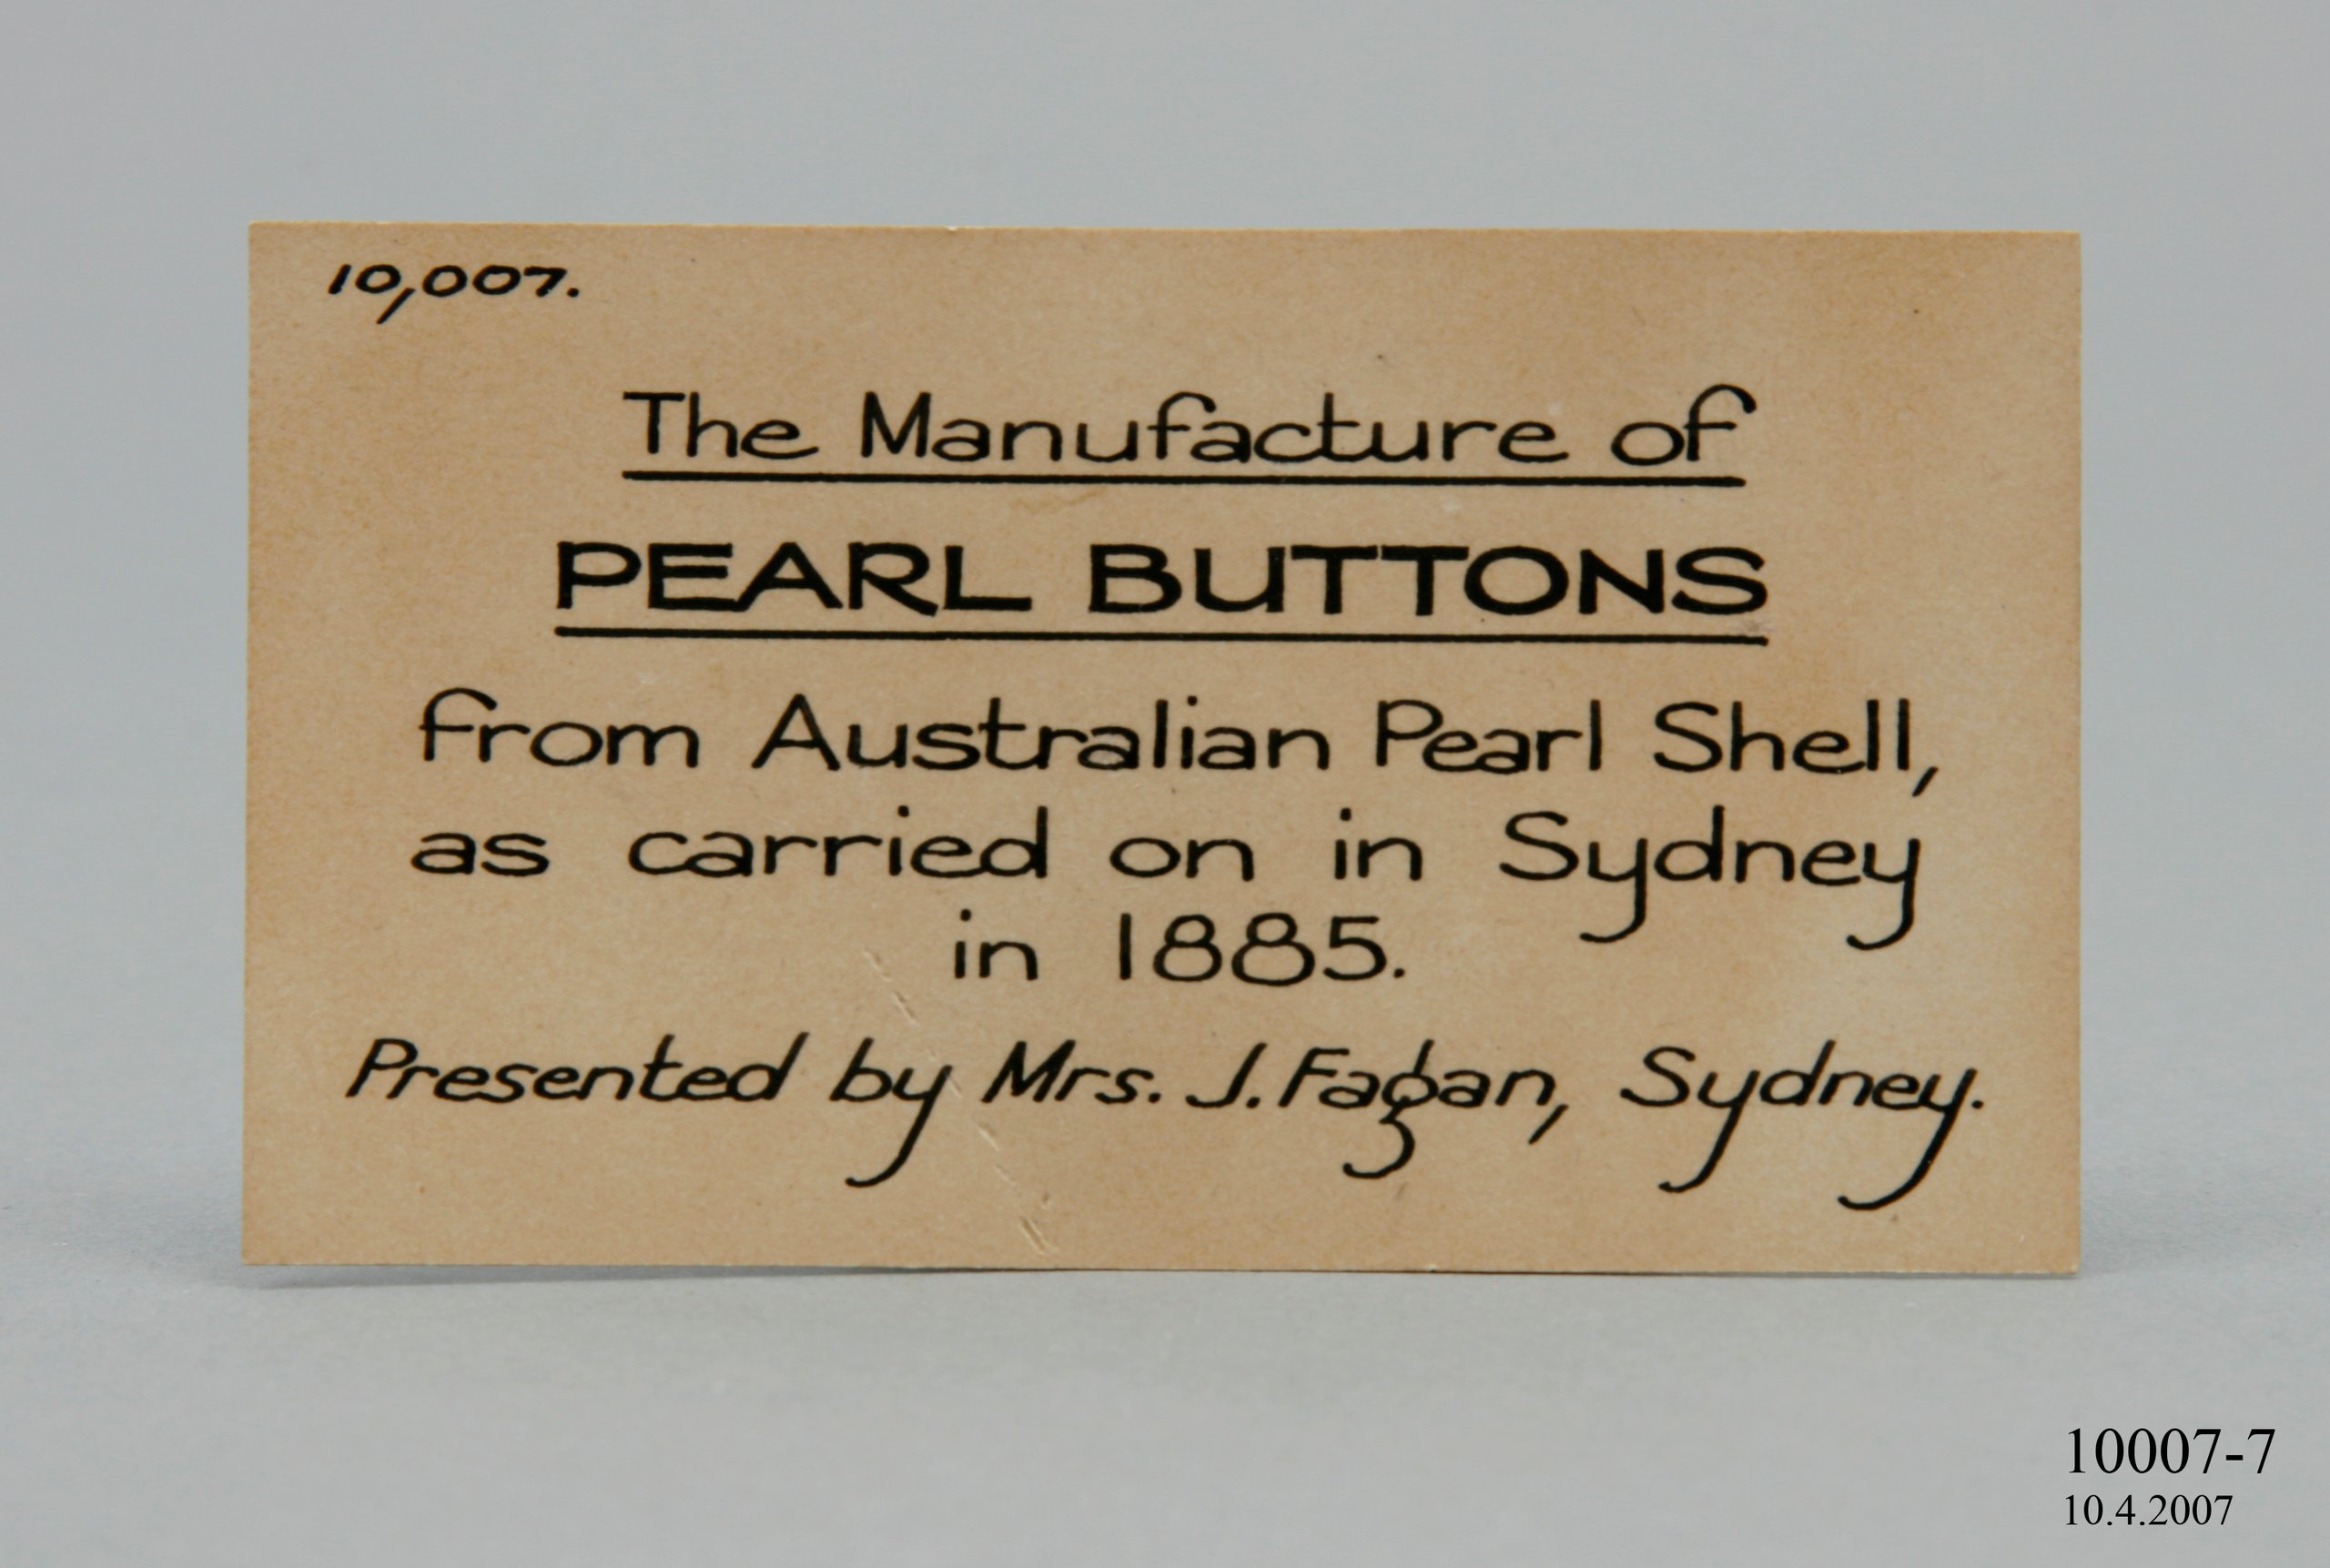 Label for didactic display of pearl shell manufacture.